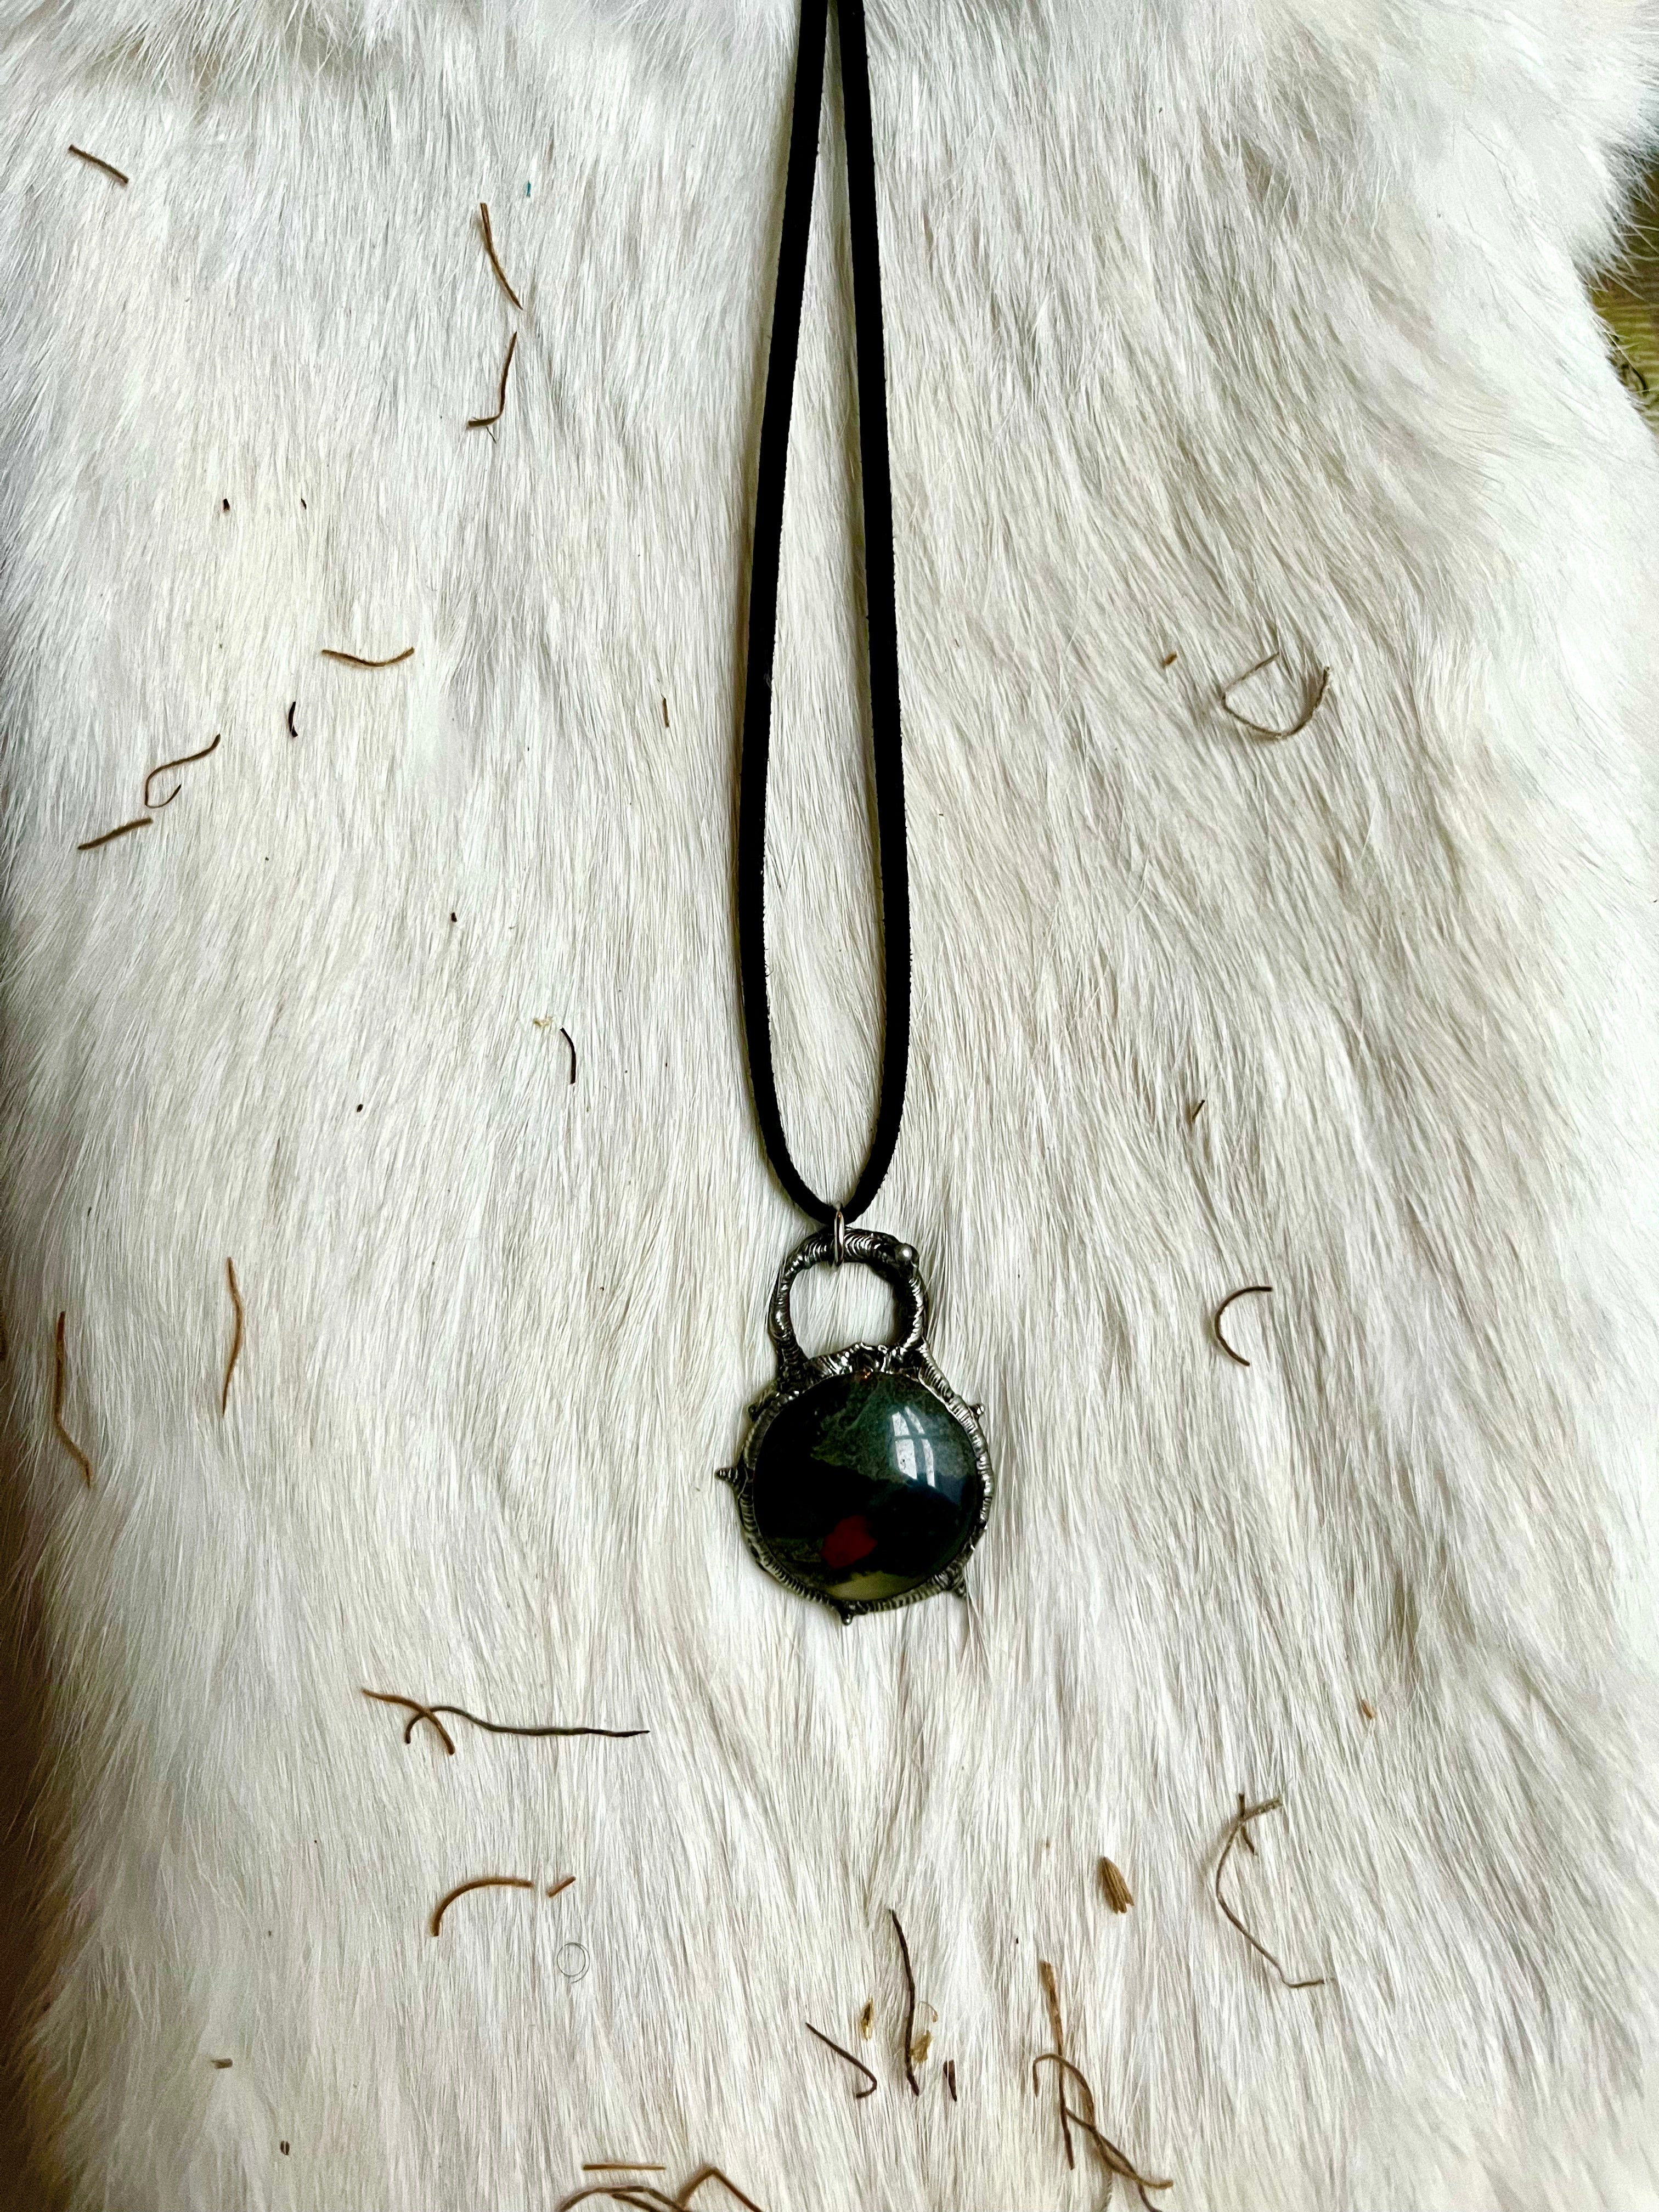 Bloodstone Security Necklace